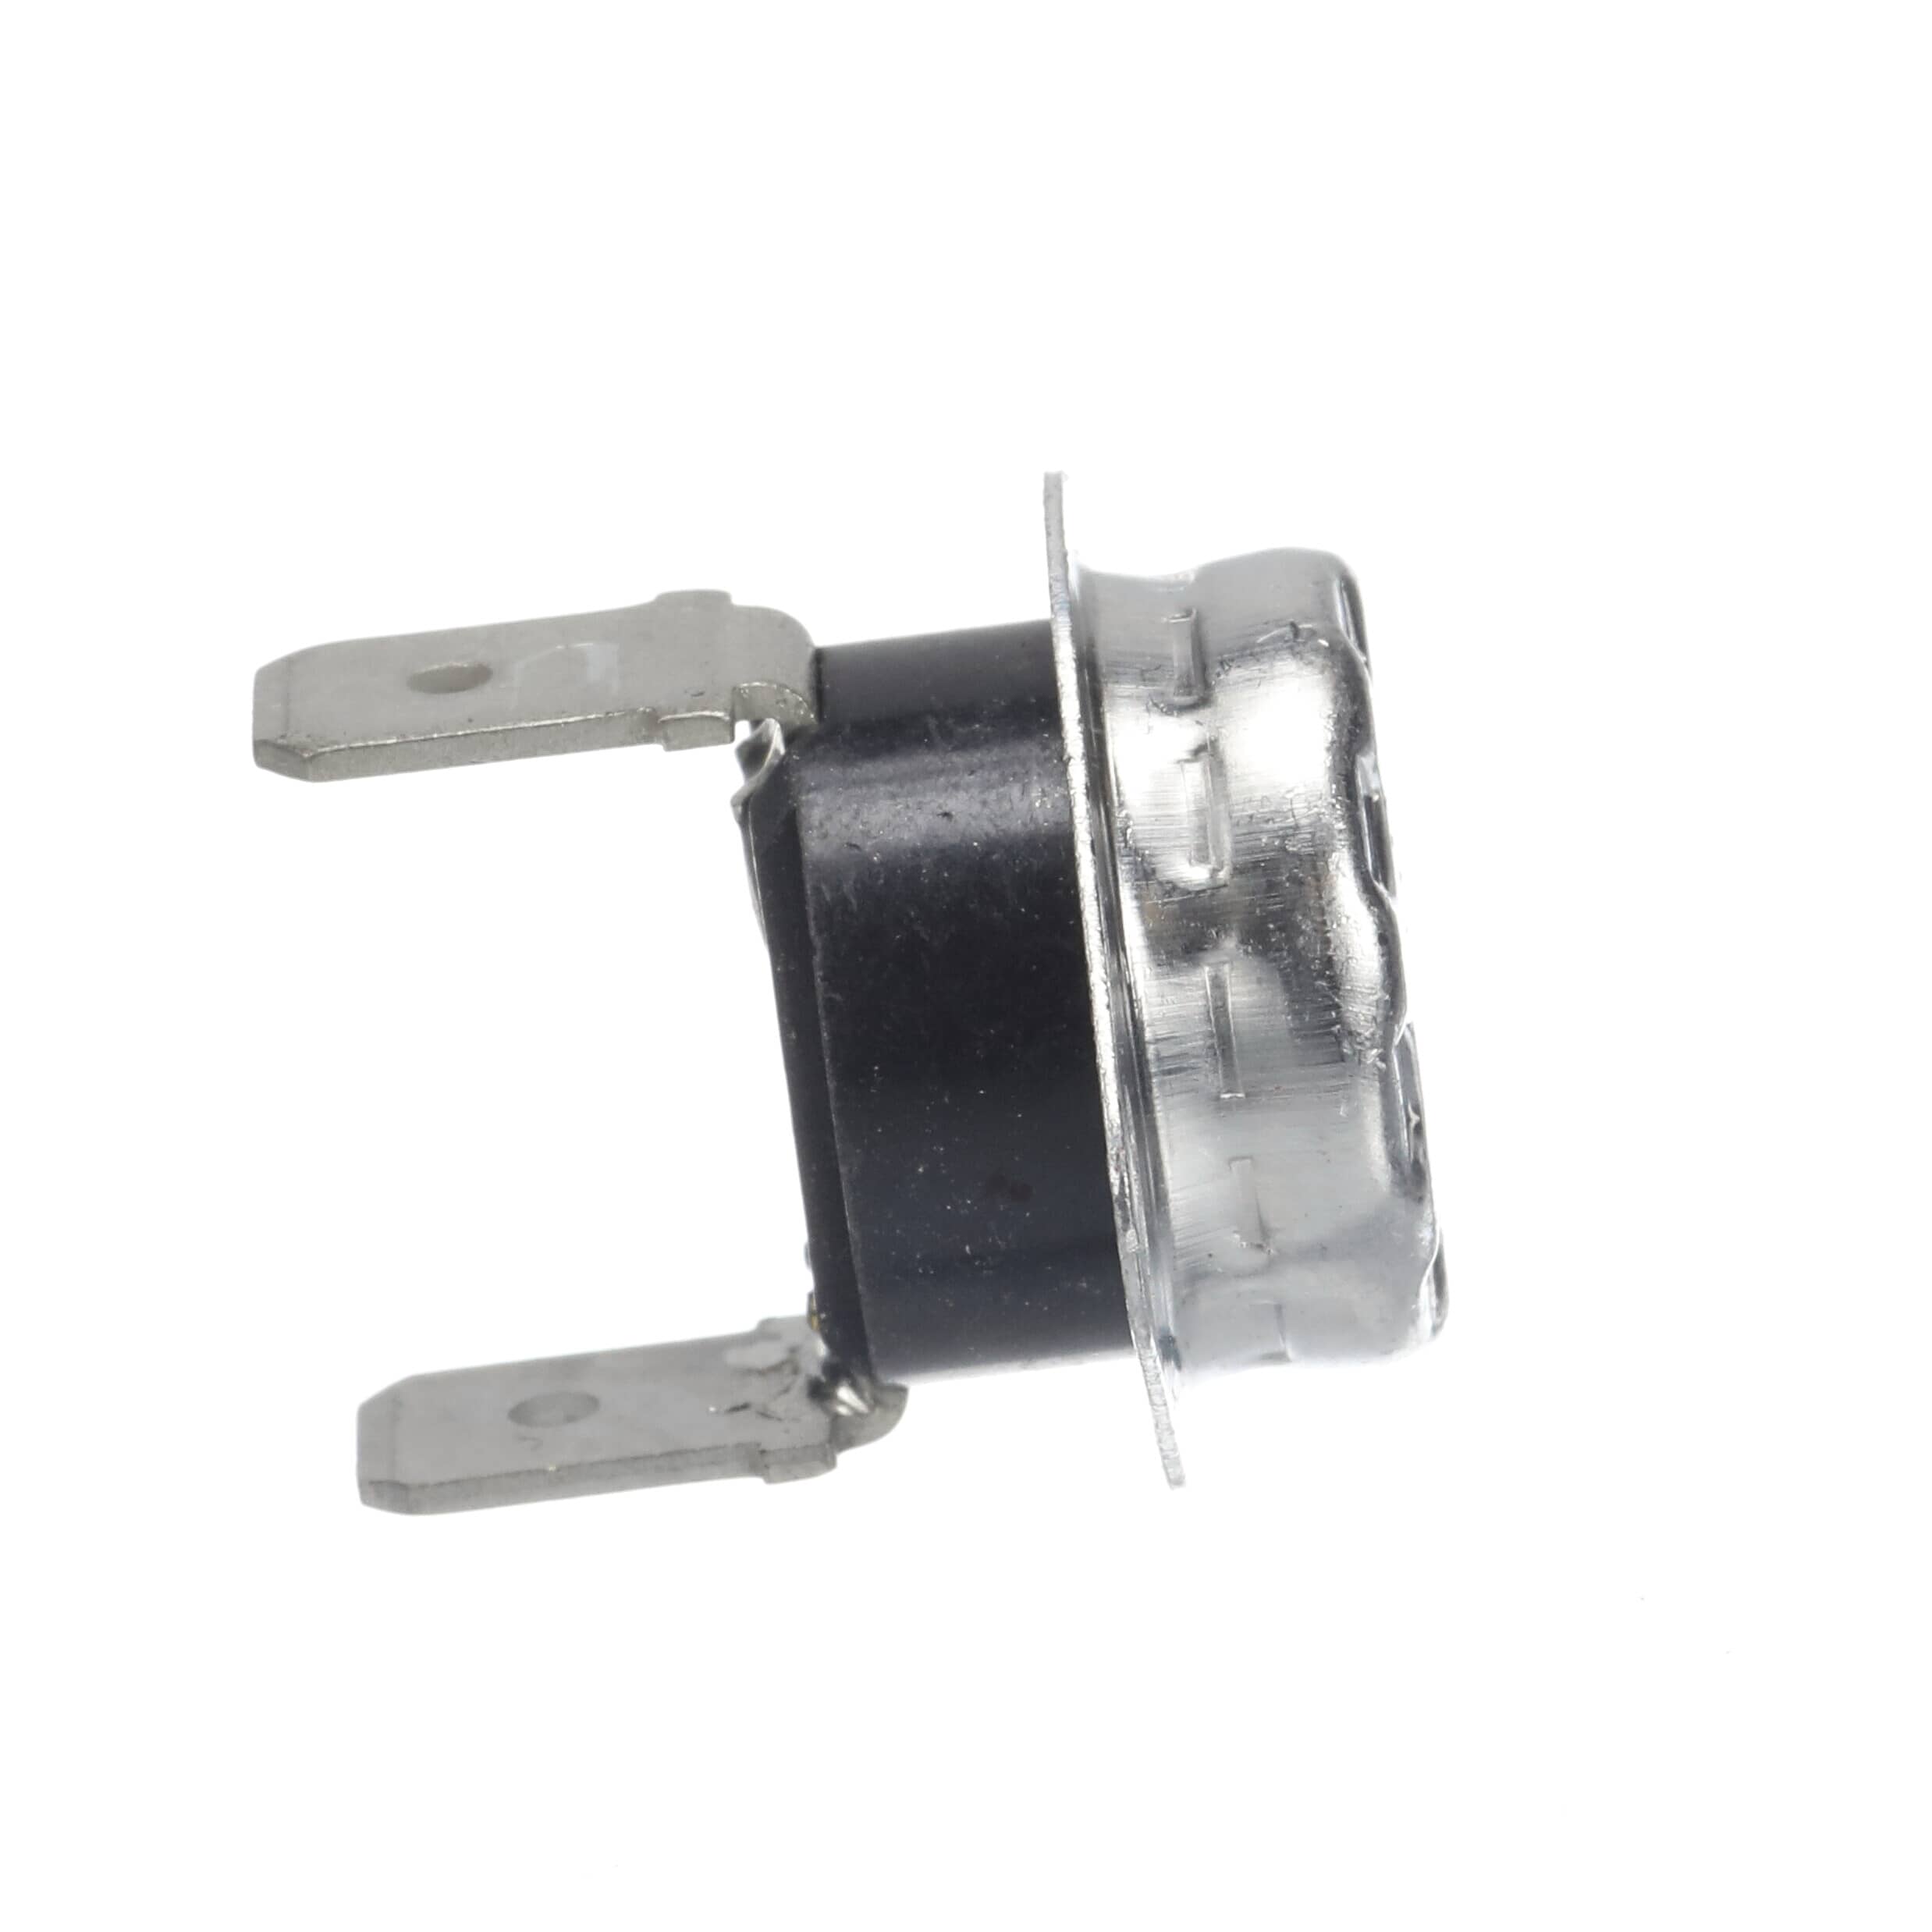 Samsung DC47-00016A Dryer Thermal Cut-Off Thermostat - Samsung Parts USA